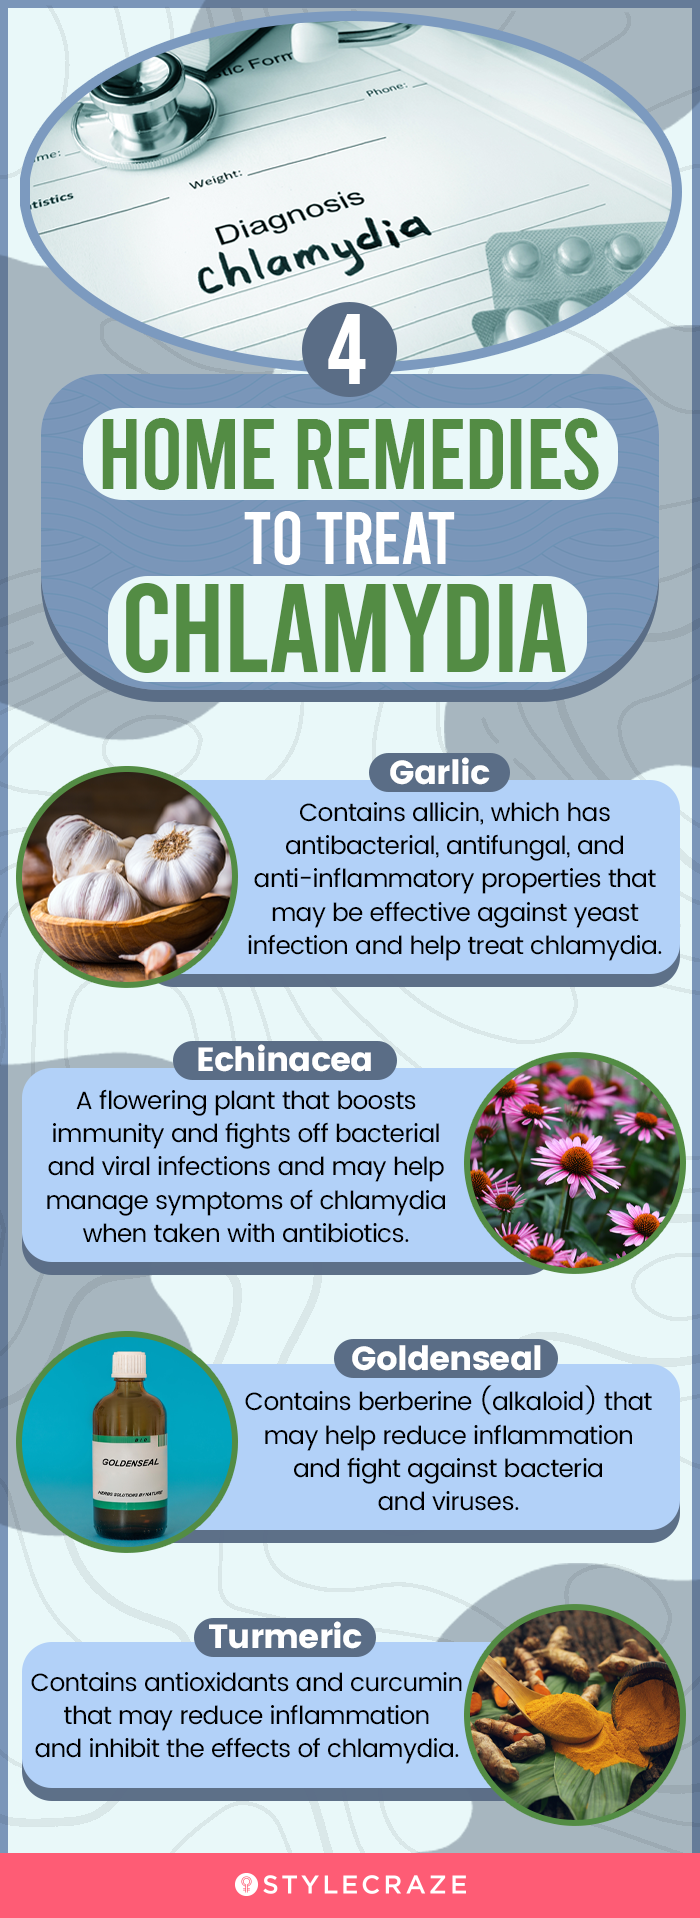 4 home remedies to treat chlamydia (infographic)